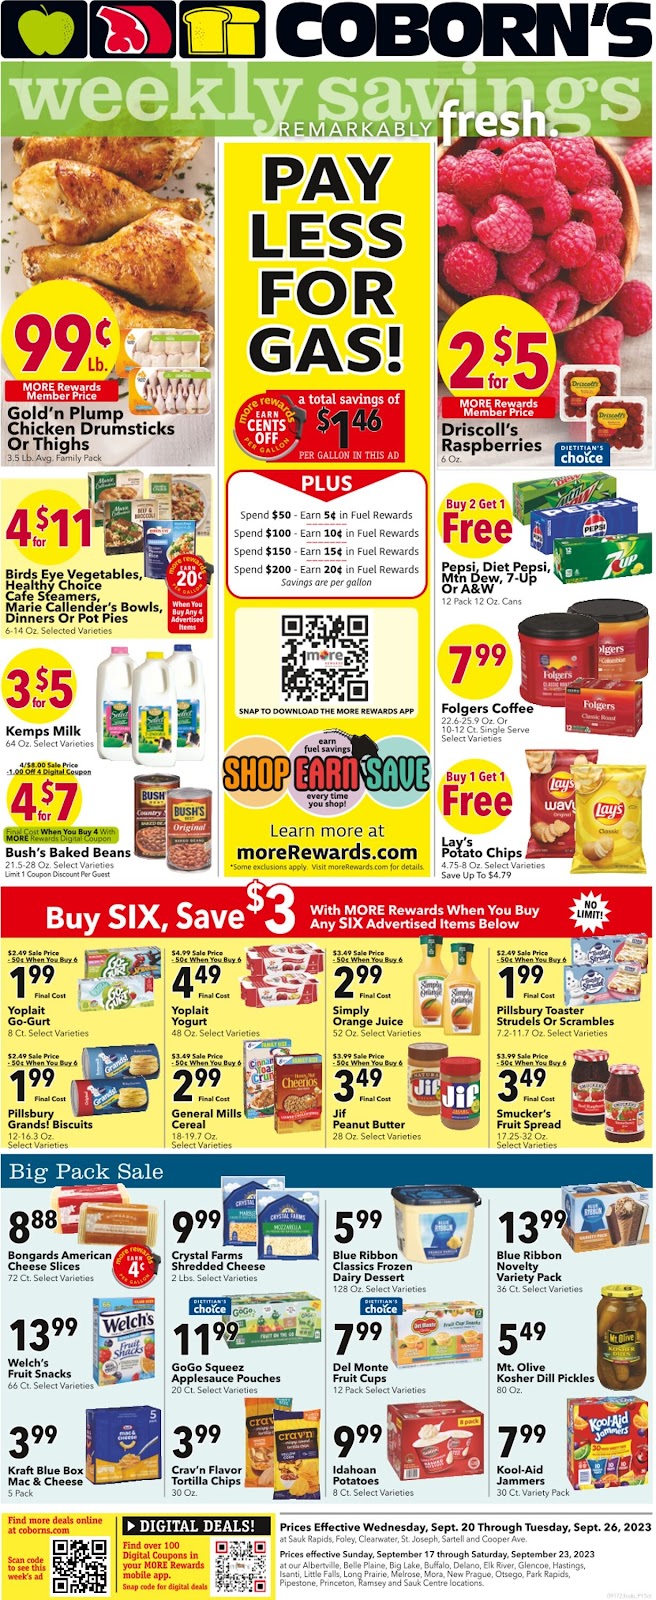 Coborn's Weekly Ad - 1